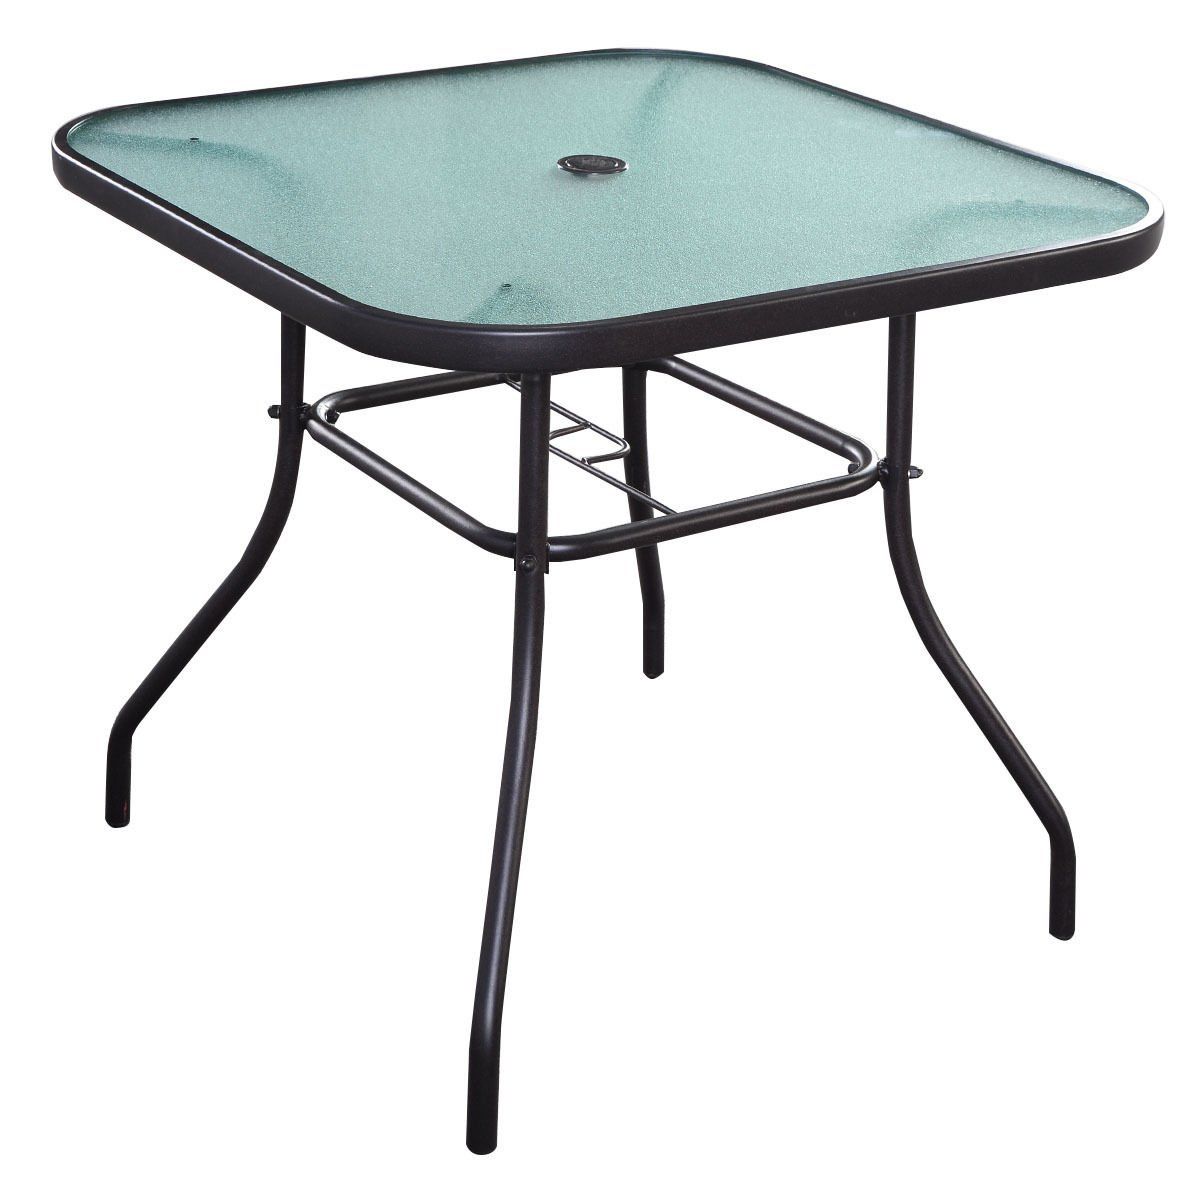 Amazon : Patio Square Bar Dining Table Glass Deck Regarding Newest Patio Square Bar Dining Tables (View 1 of 30)